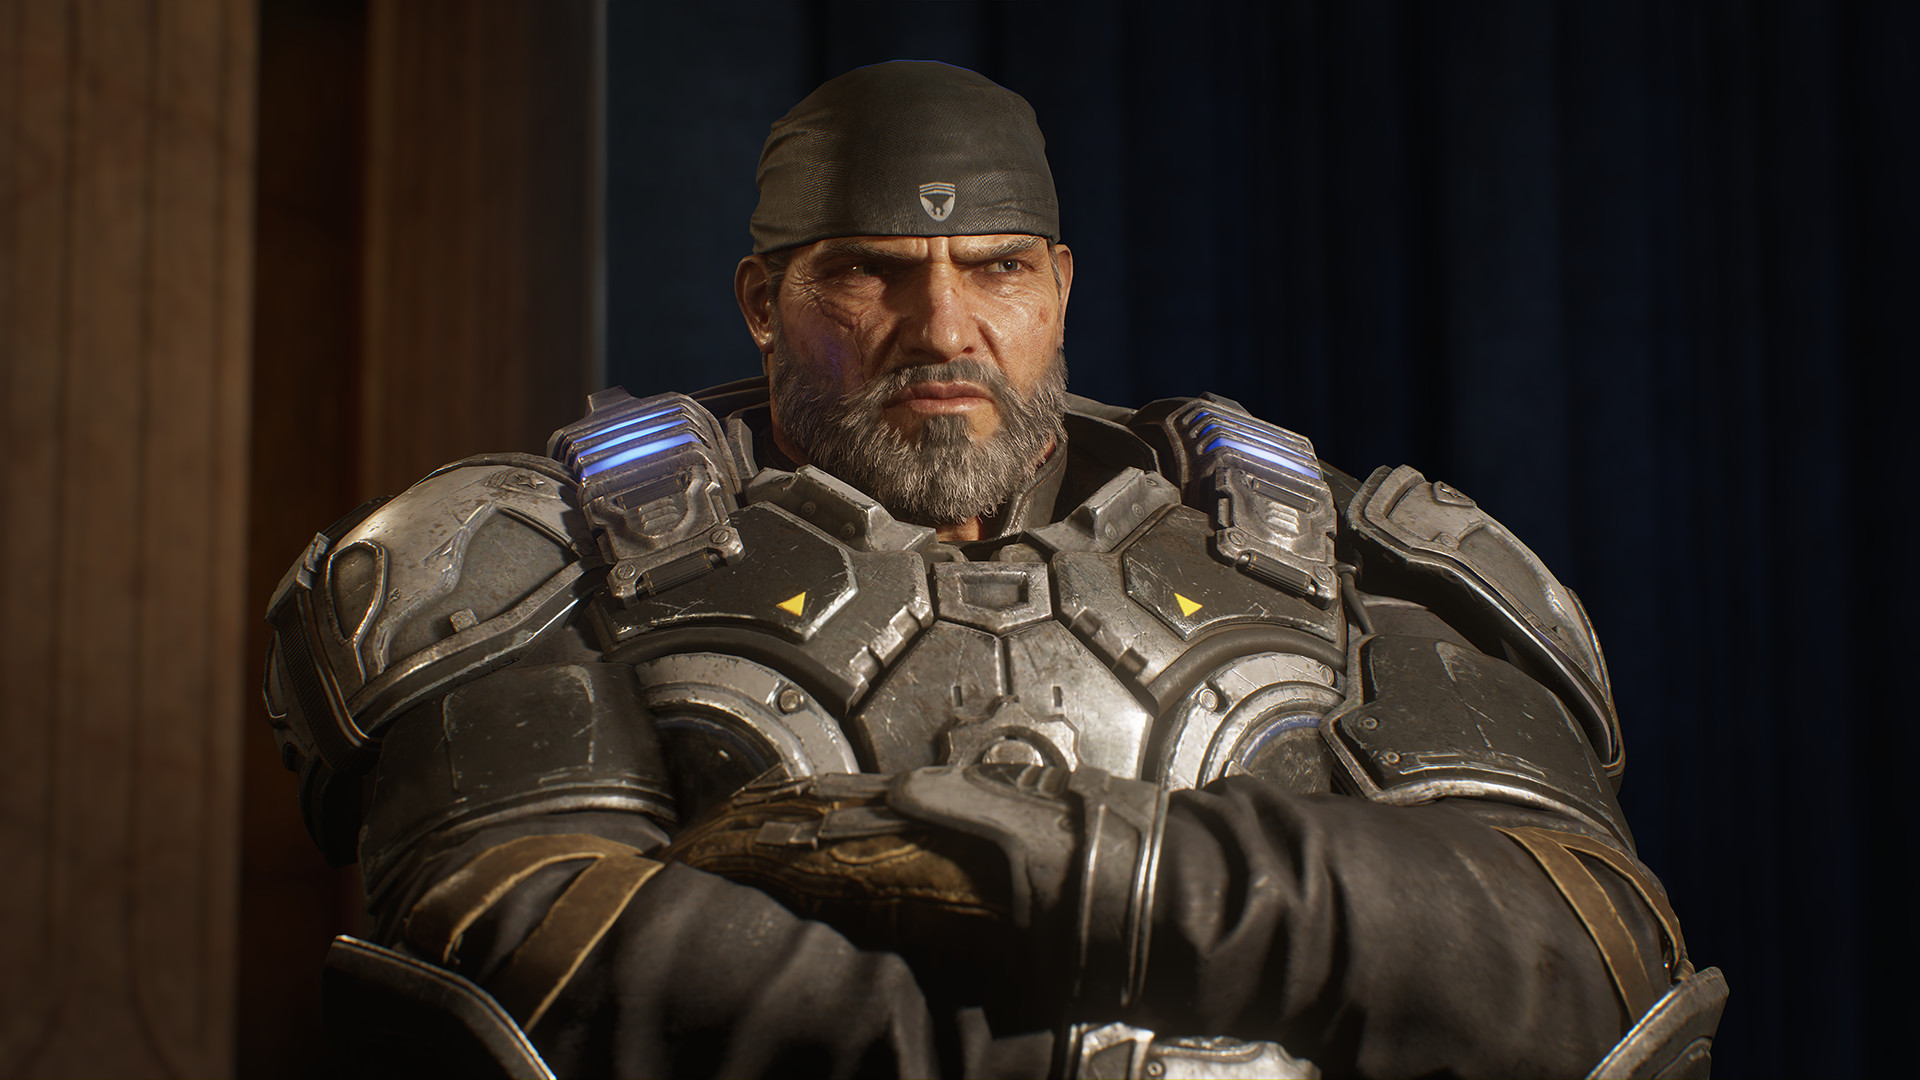 Gears 5 - Ultra-HD Texture Pack on Steam